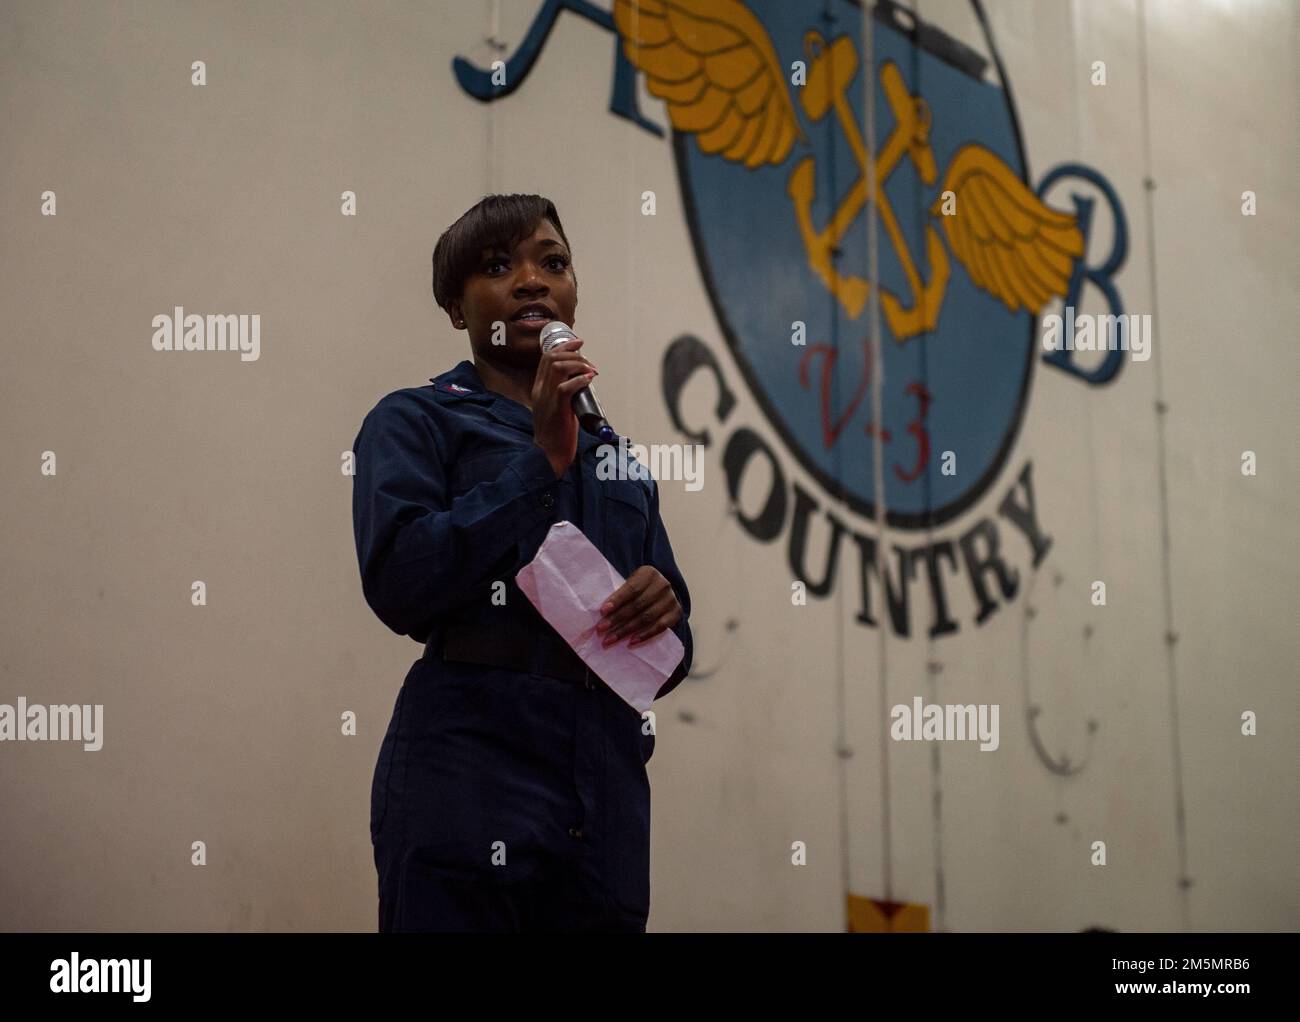 220327-N-PG226-1012 IONIAN SEA (Mar. 27, 2022) Logistics Specialist 2nd Class Autumn Cole, from Jacksonville, Florida, speaks during a women's history month observance in the hangar bay of the Nimitz-class aircraft carrier USS Harry S. Truman (CVN 75), Mar. 27, 2022. The Harry S. Truman Carrier Strike Group is on a scheduled deployment in the U.S. Sixth Fleet area of operations in support of U.S., allied and partner interests in Europe and Africa. Stock Photo